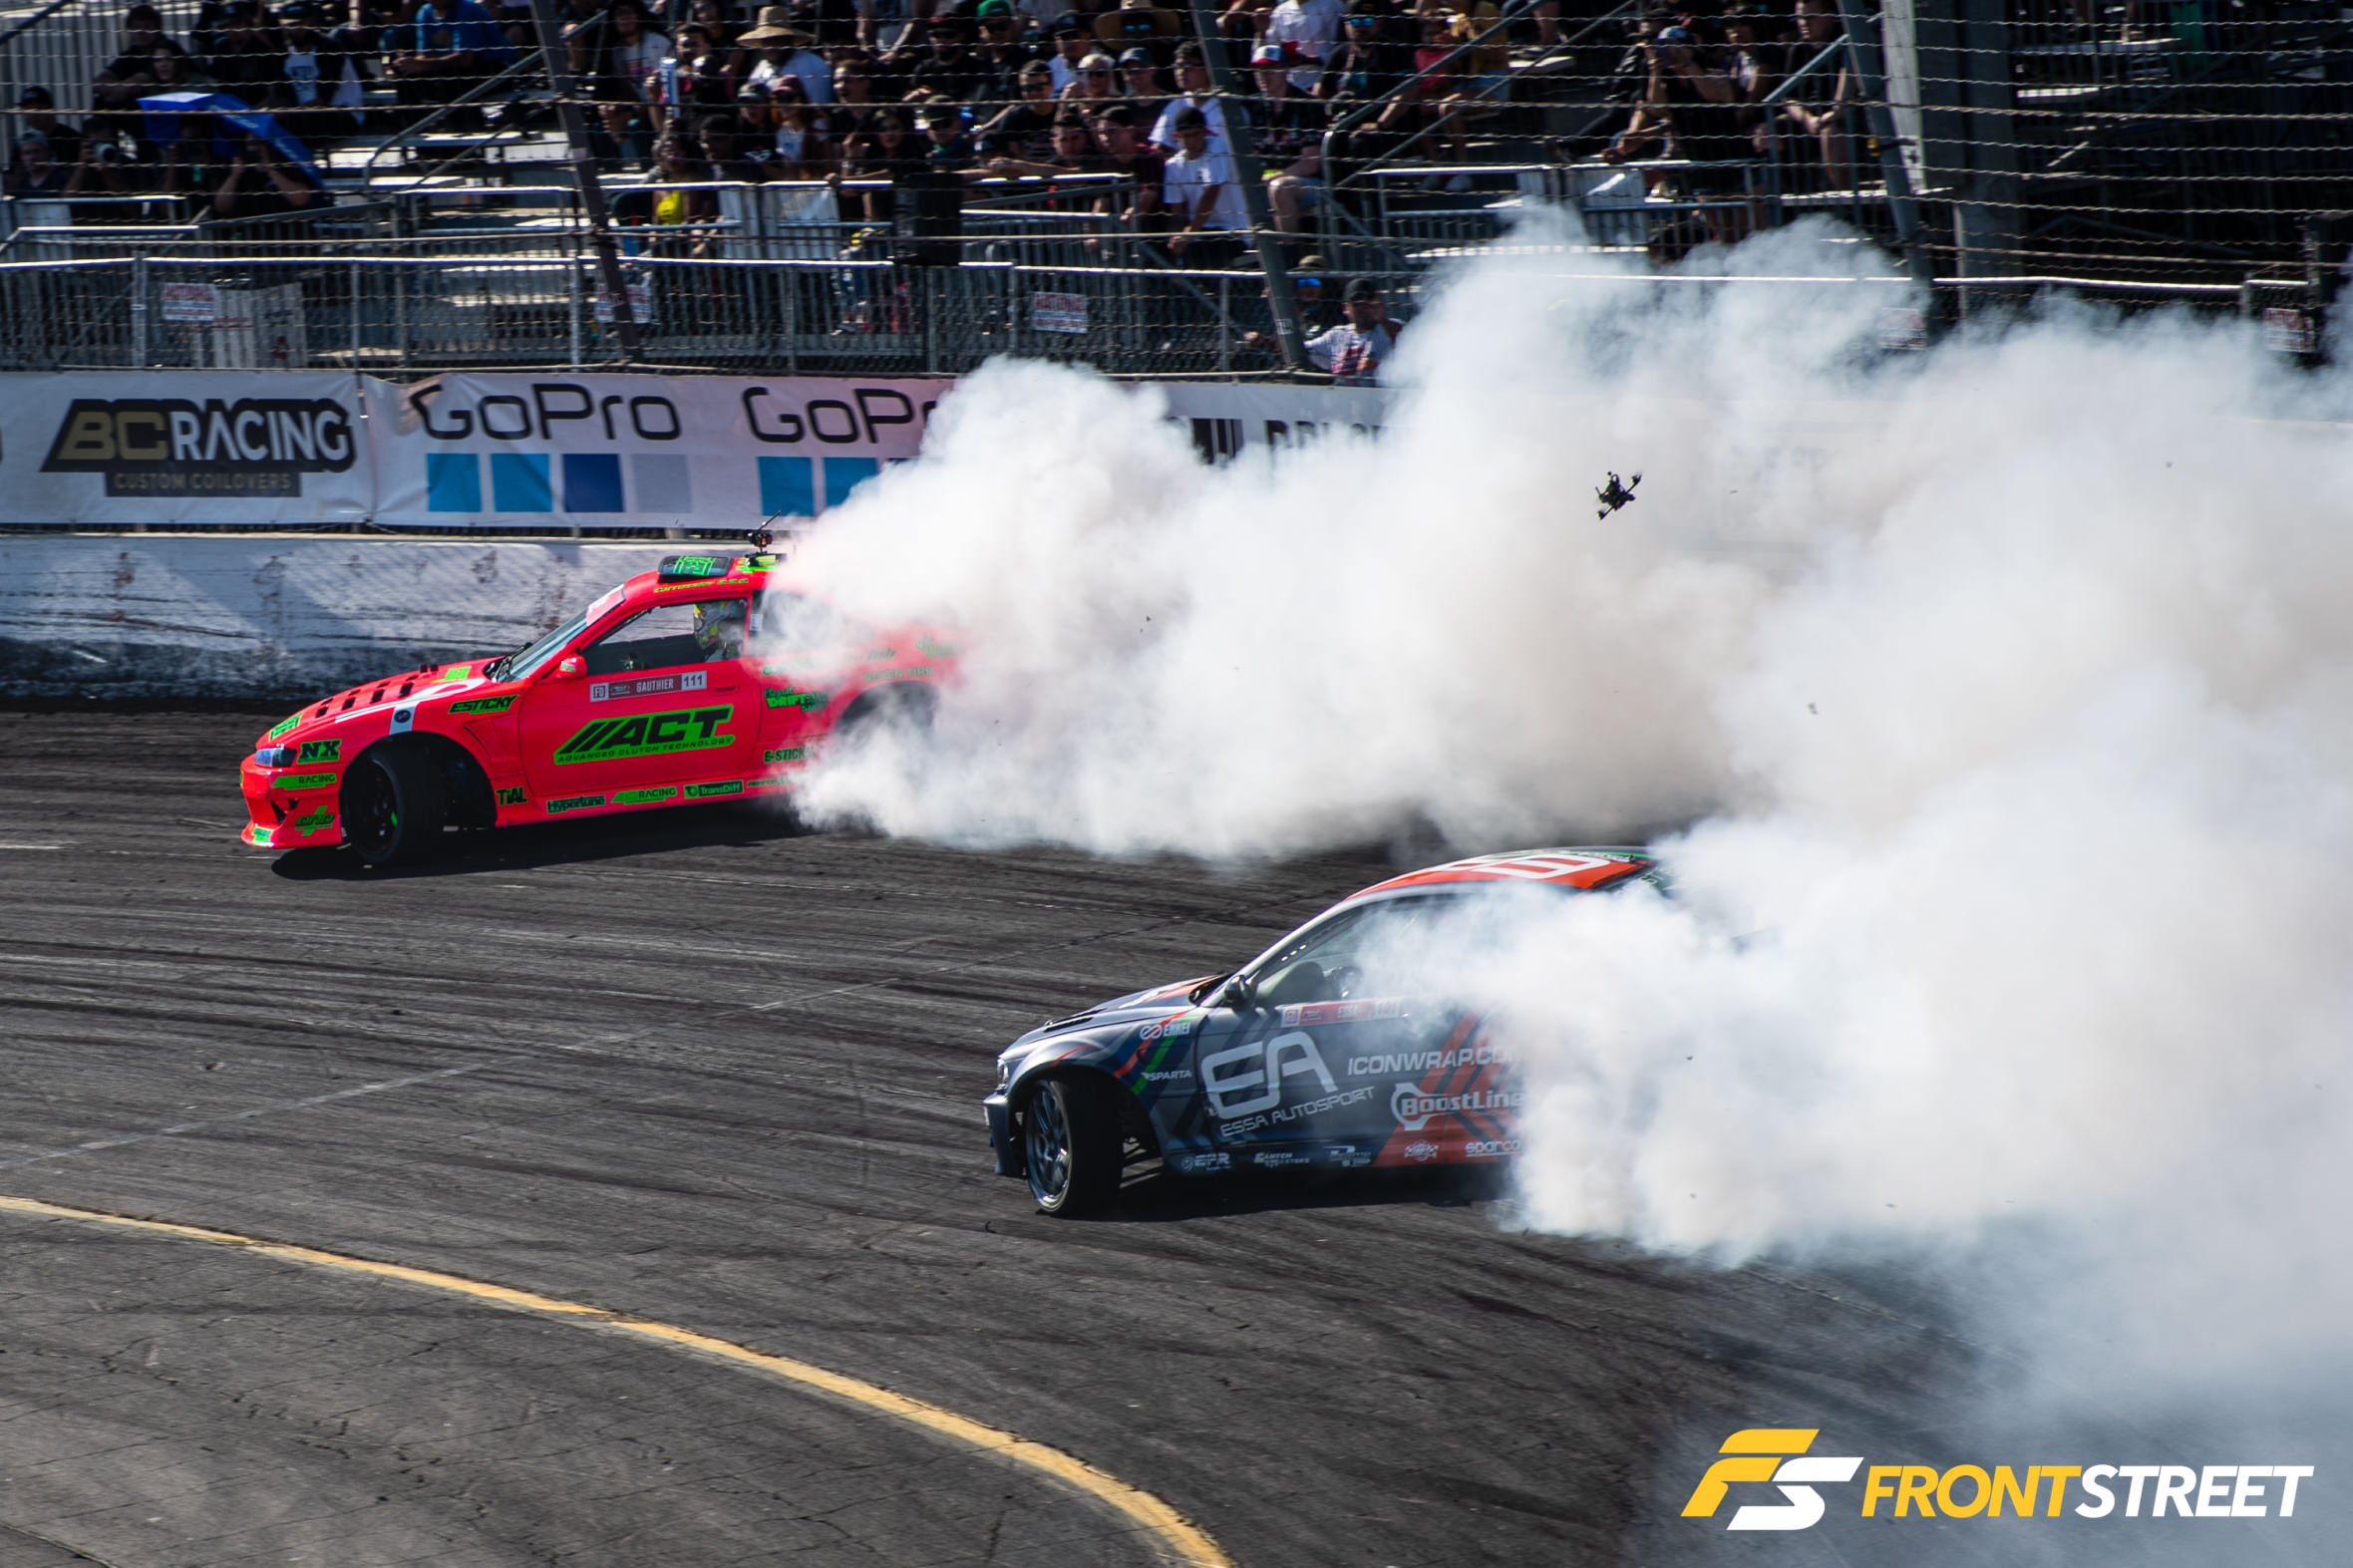 Formula D Irwindale Is 2019's Final Stanza, Filled With Drama